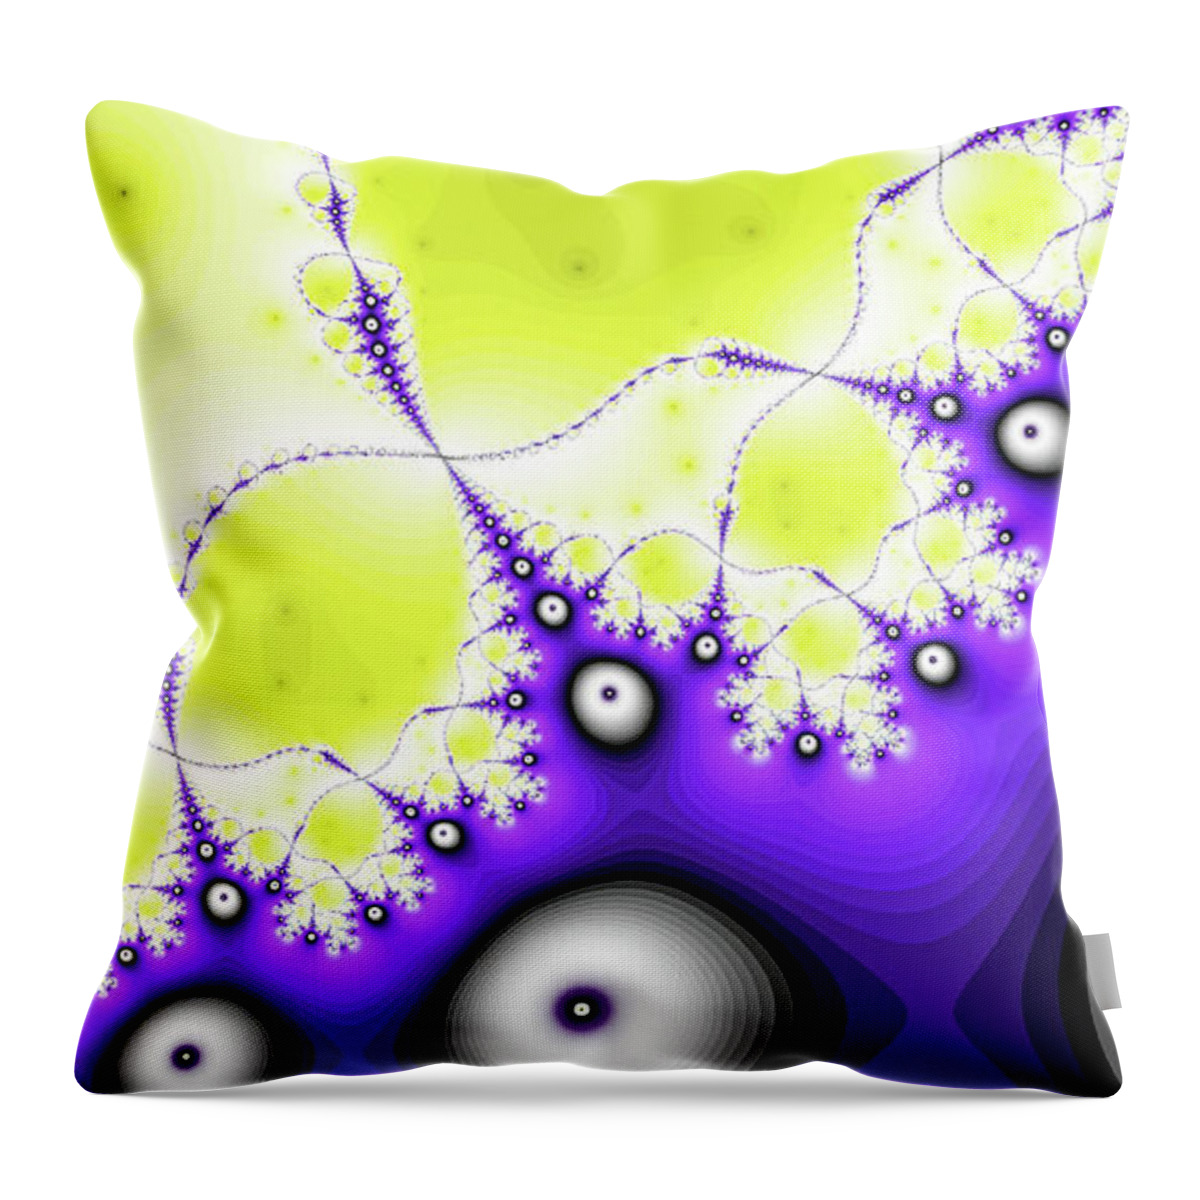 Abstract Throw Pillow featuring the digital art Luminous Split Purple by Don Northup